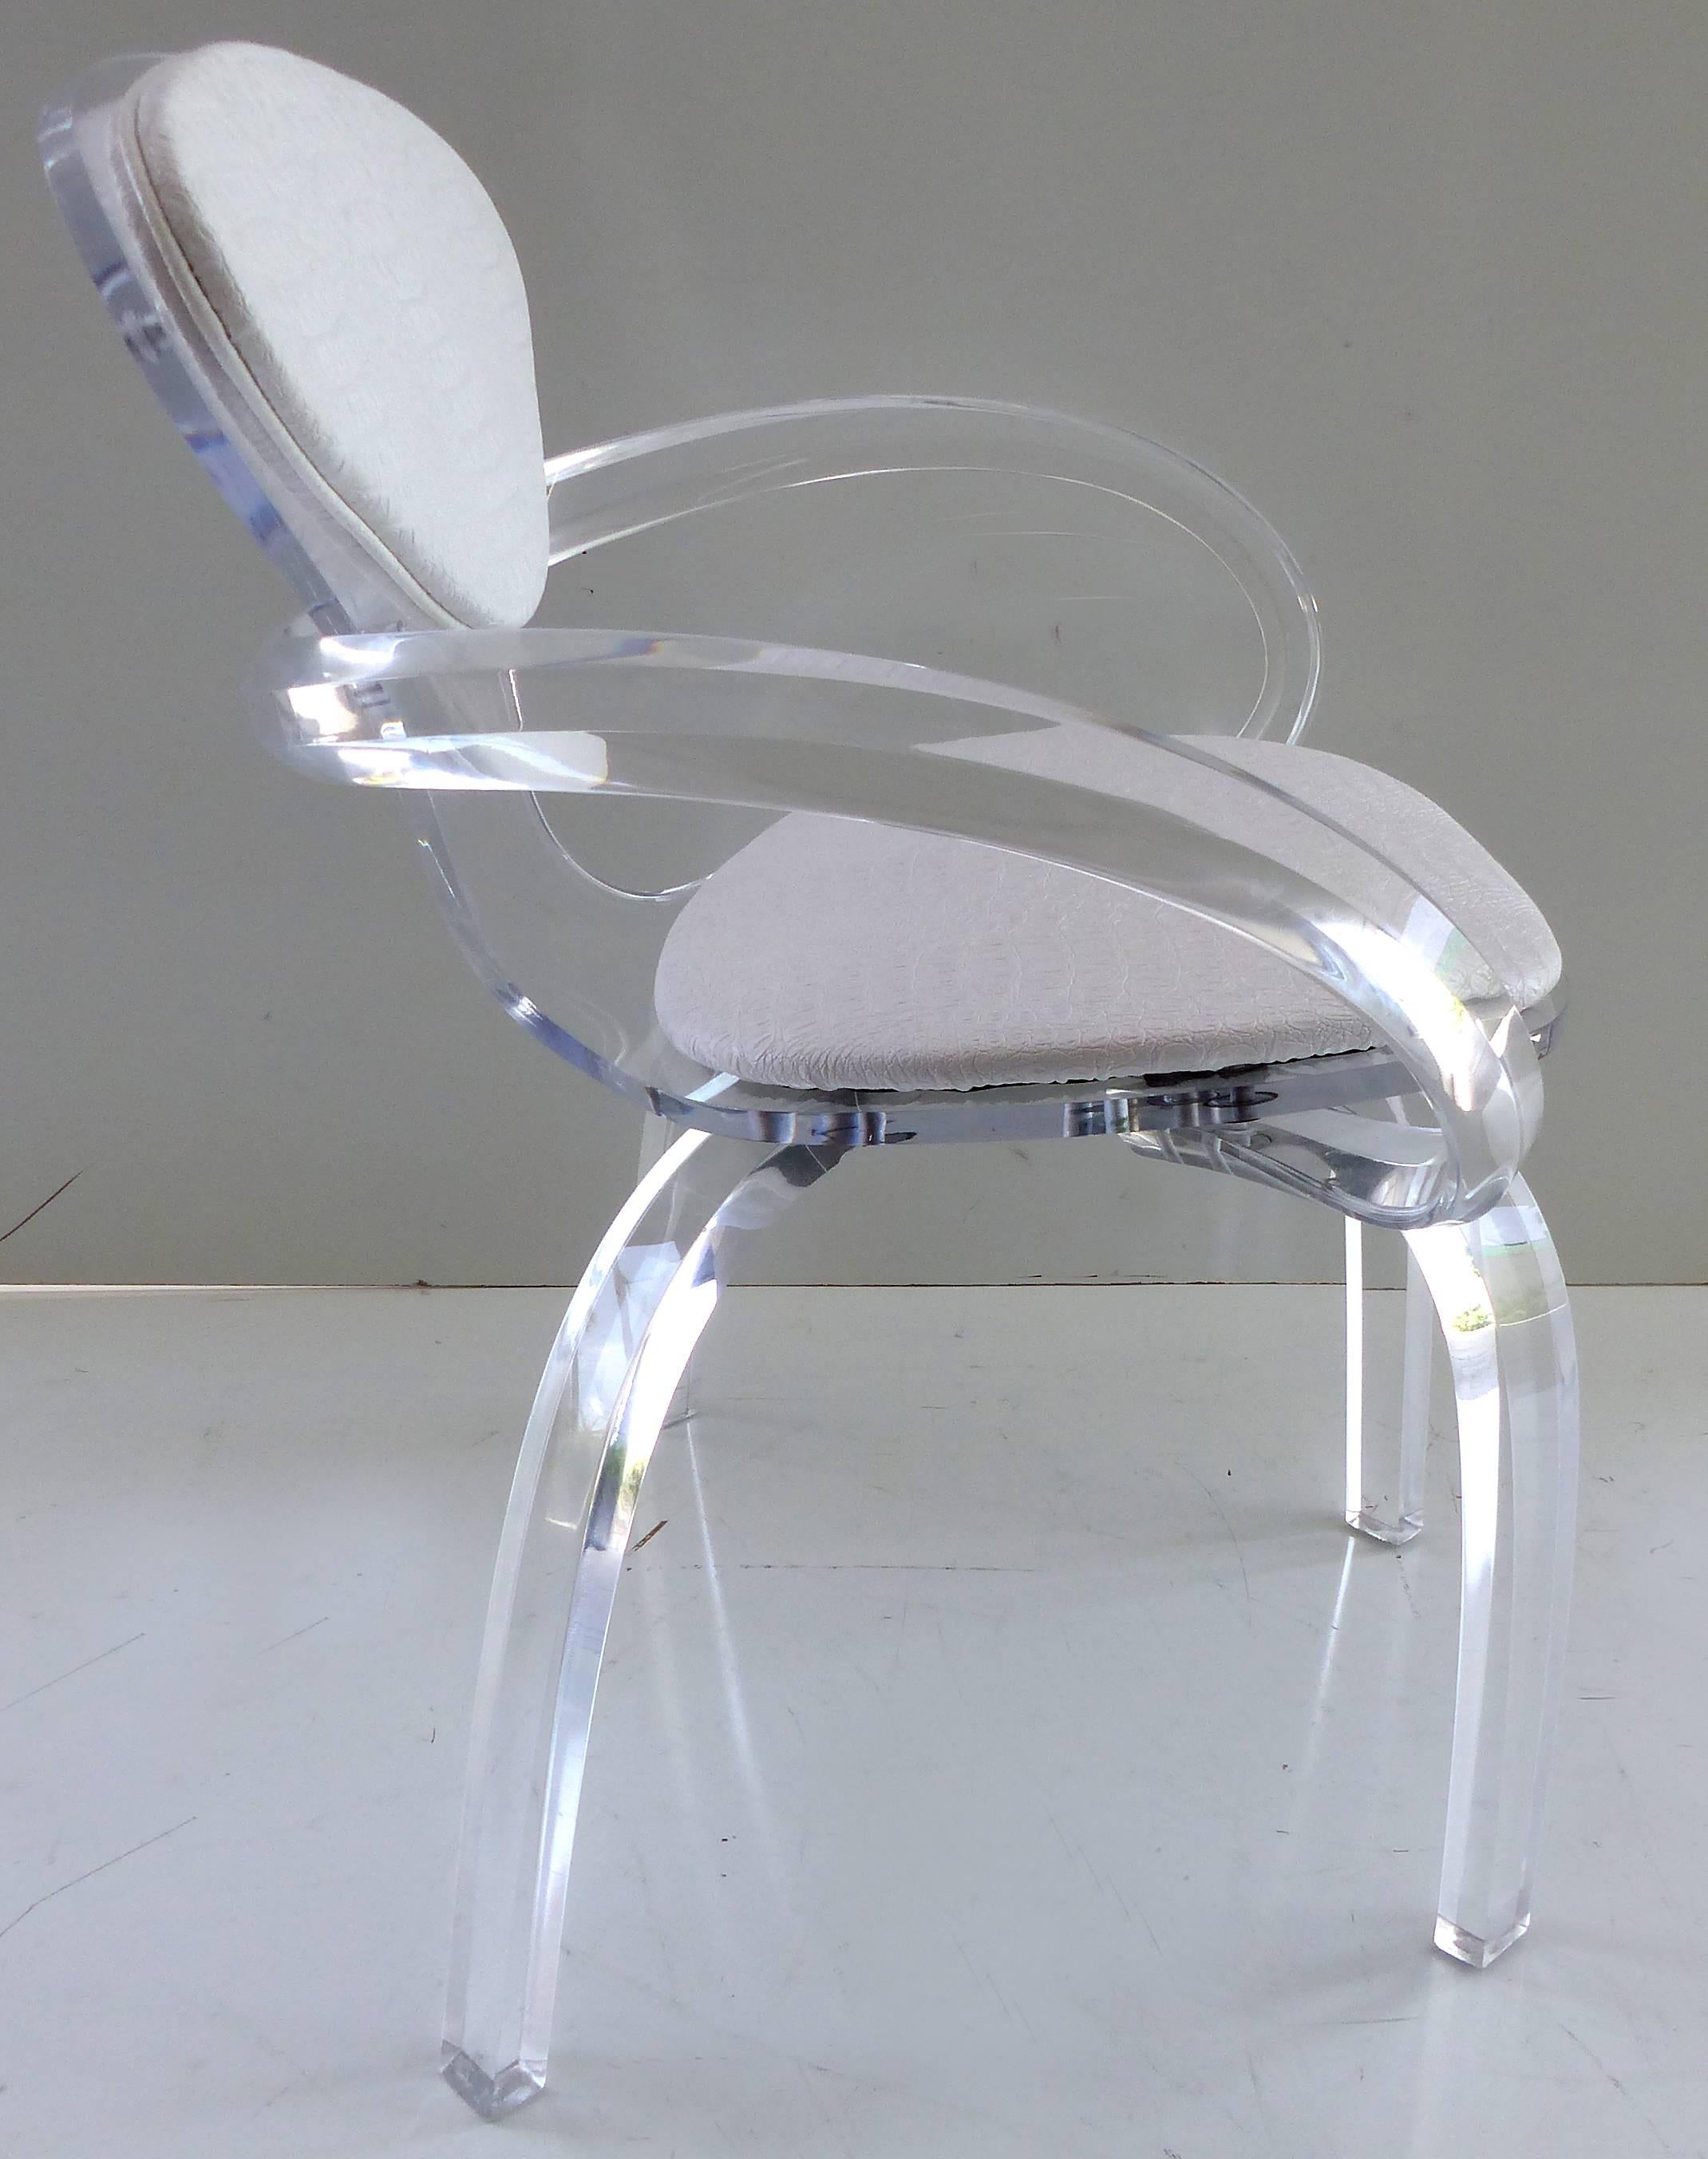 Custom-Made Lucite Pretzel Chair Inspired by the Norman Cherner Classic

Offered is a custom-made bent Lucite pretzel chair paying homage to the Norman Cherner original of bentwood. This chair is a prototype and the only one available at present.